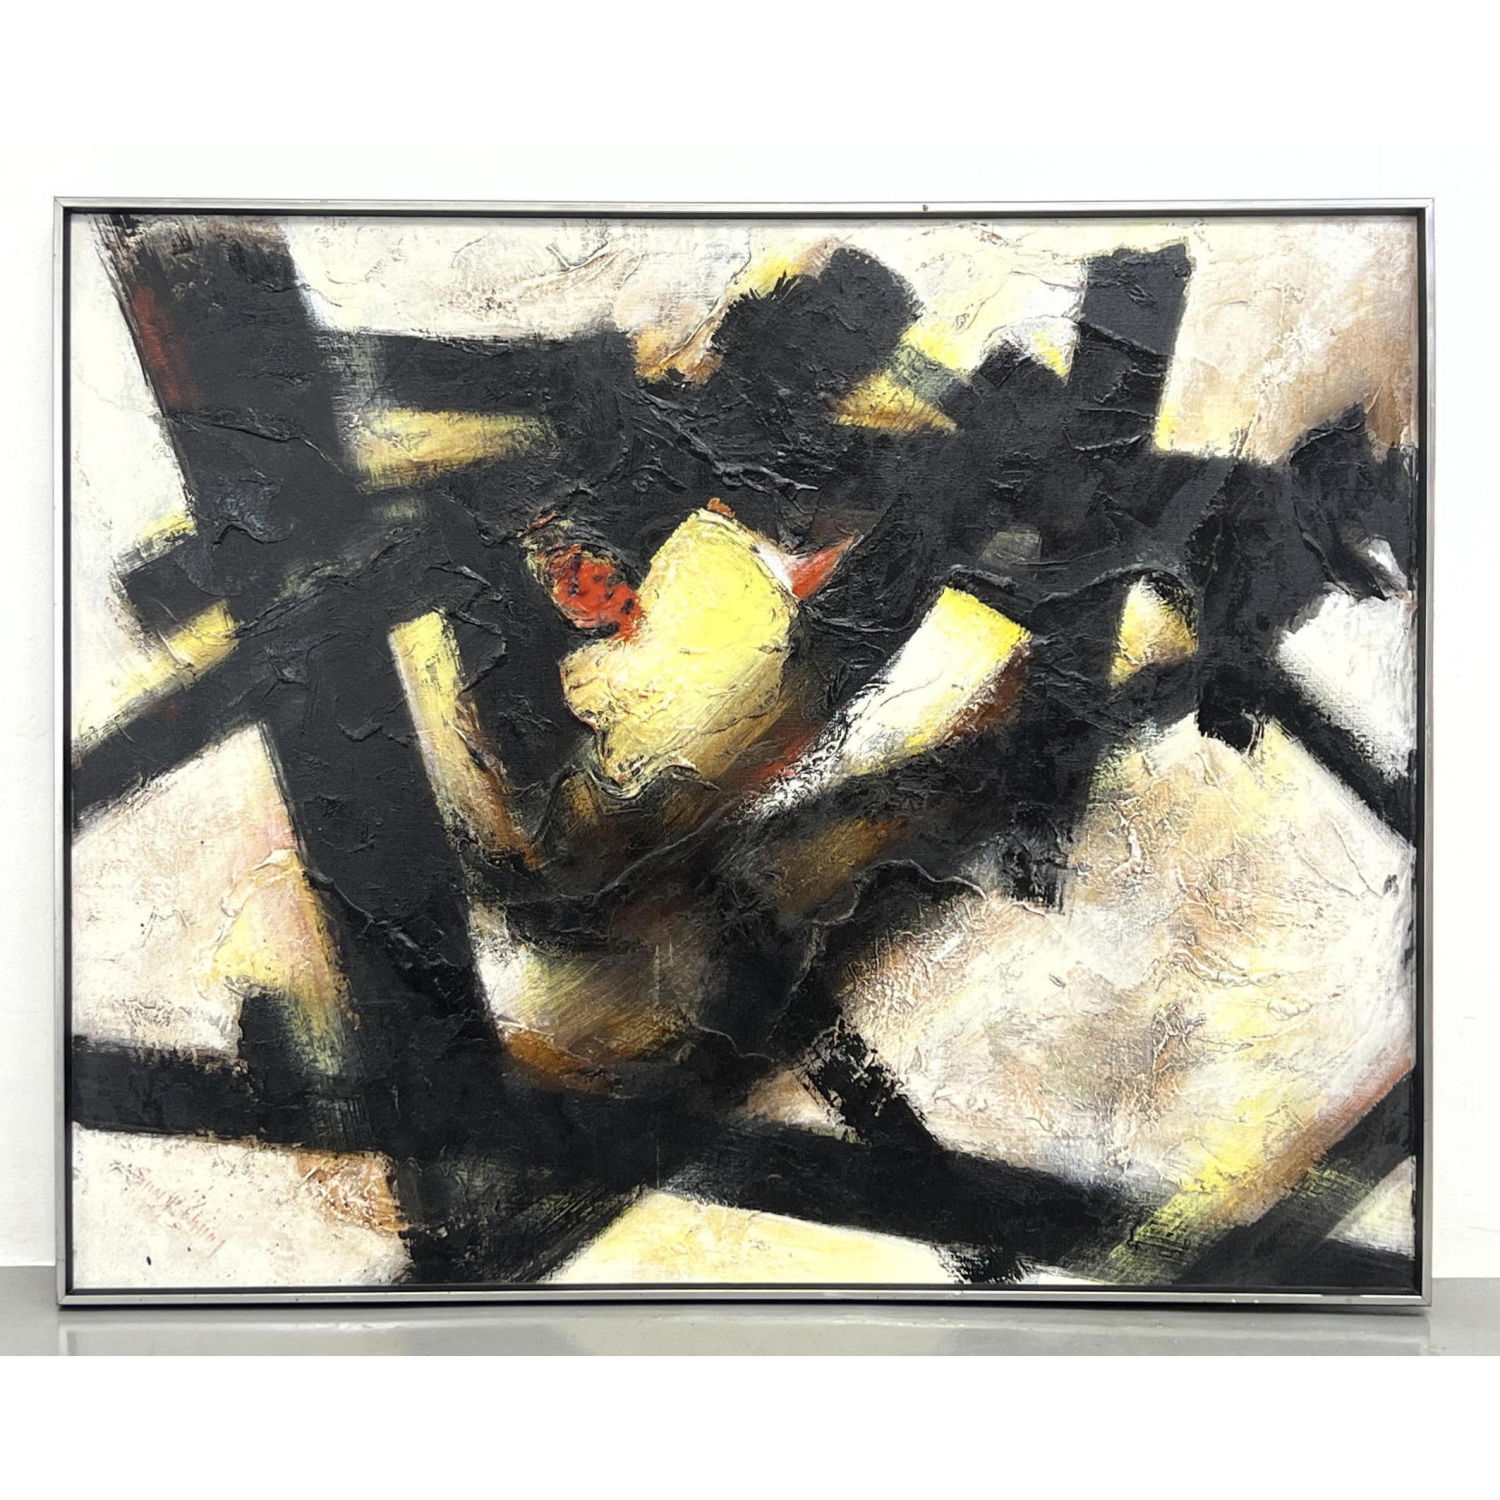 SUNY CHUNG Abstract Expressionist